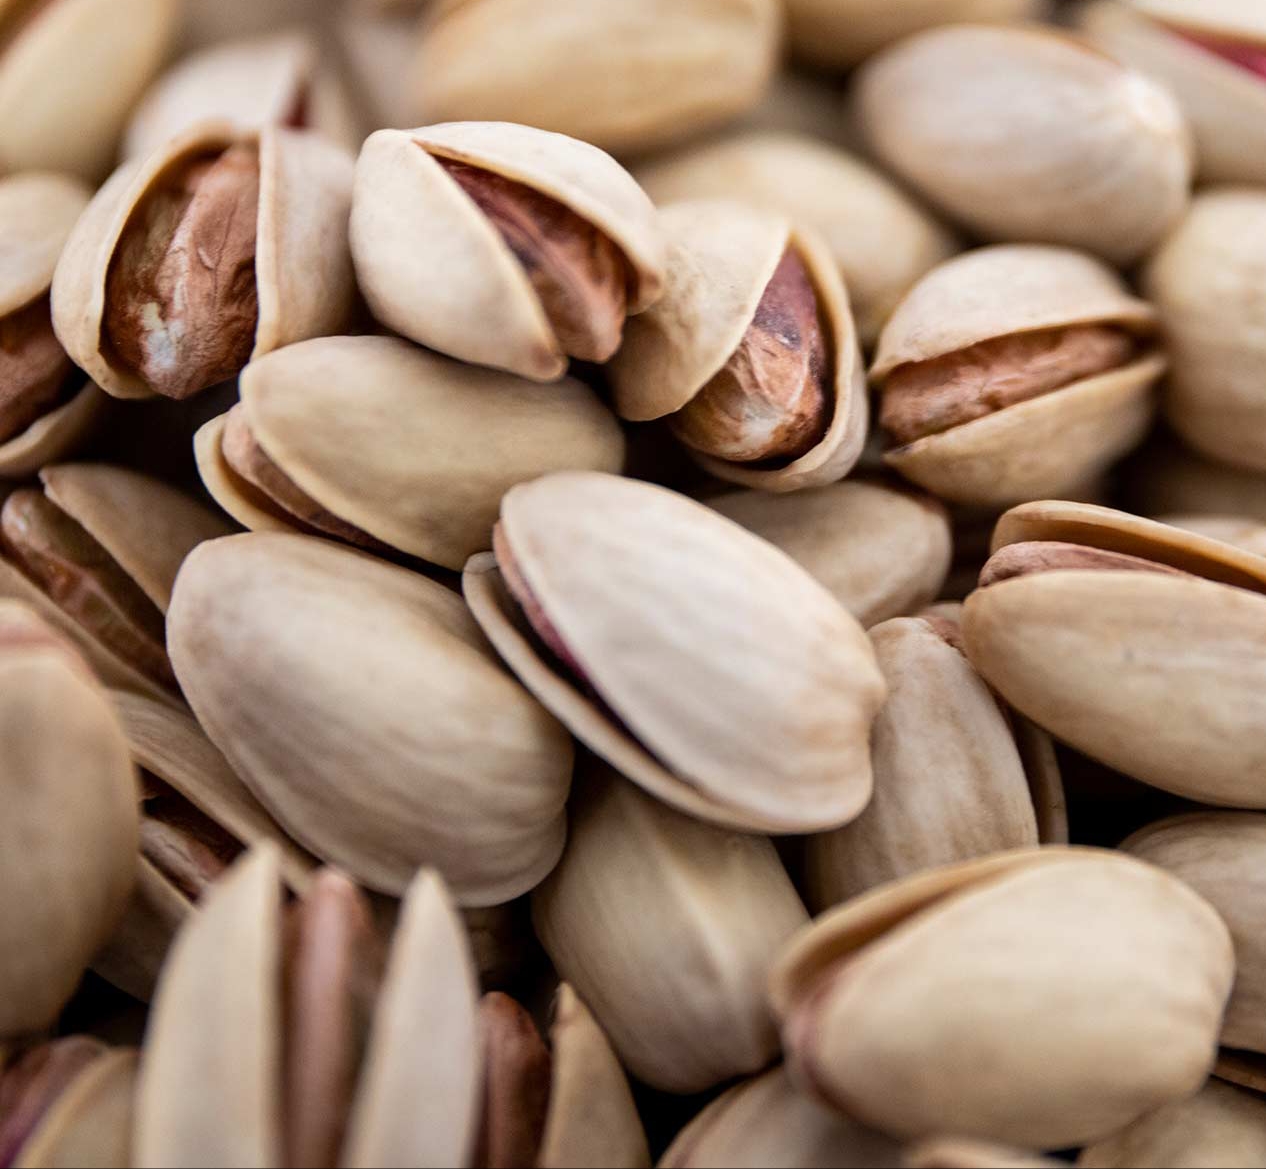 Exporter of Iranian pistachios to the UAE | Nutex Company